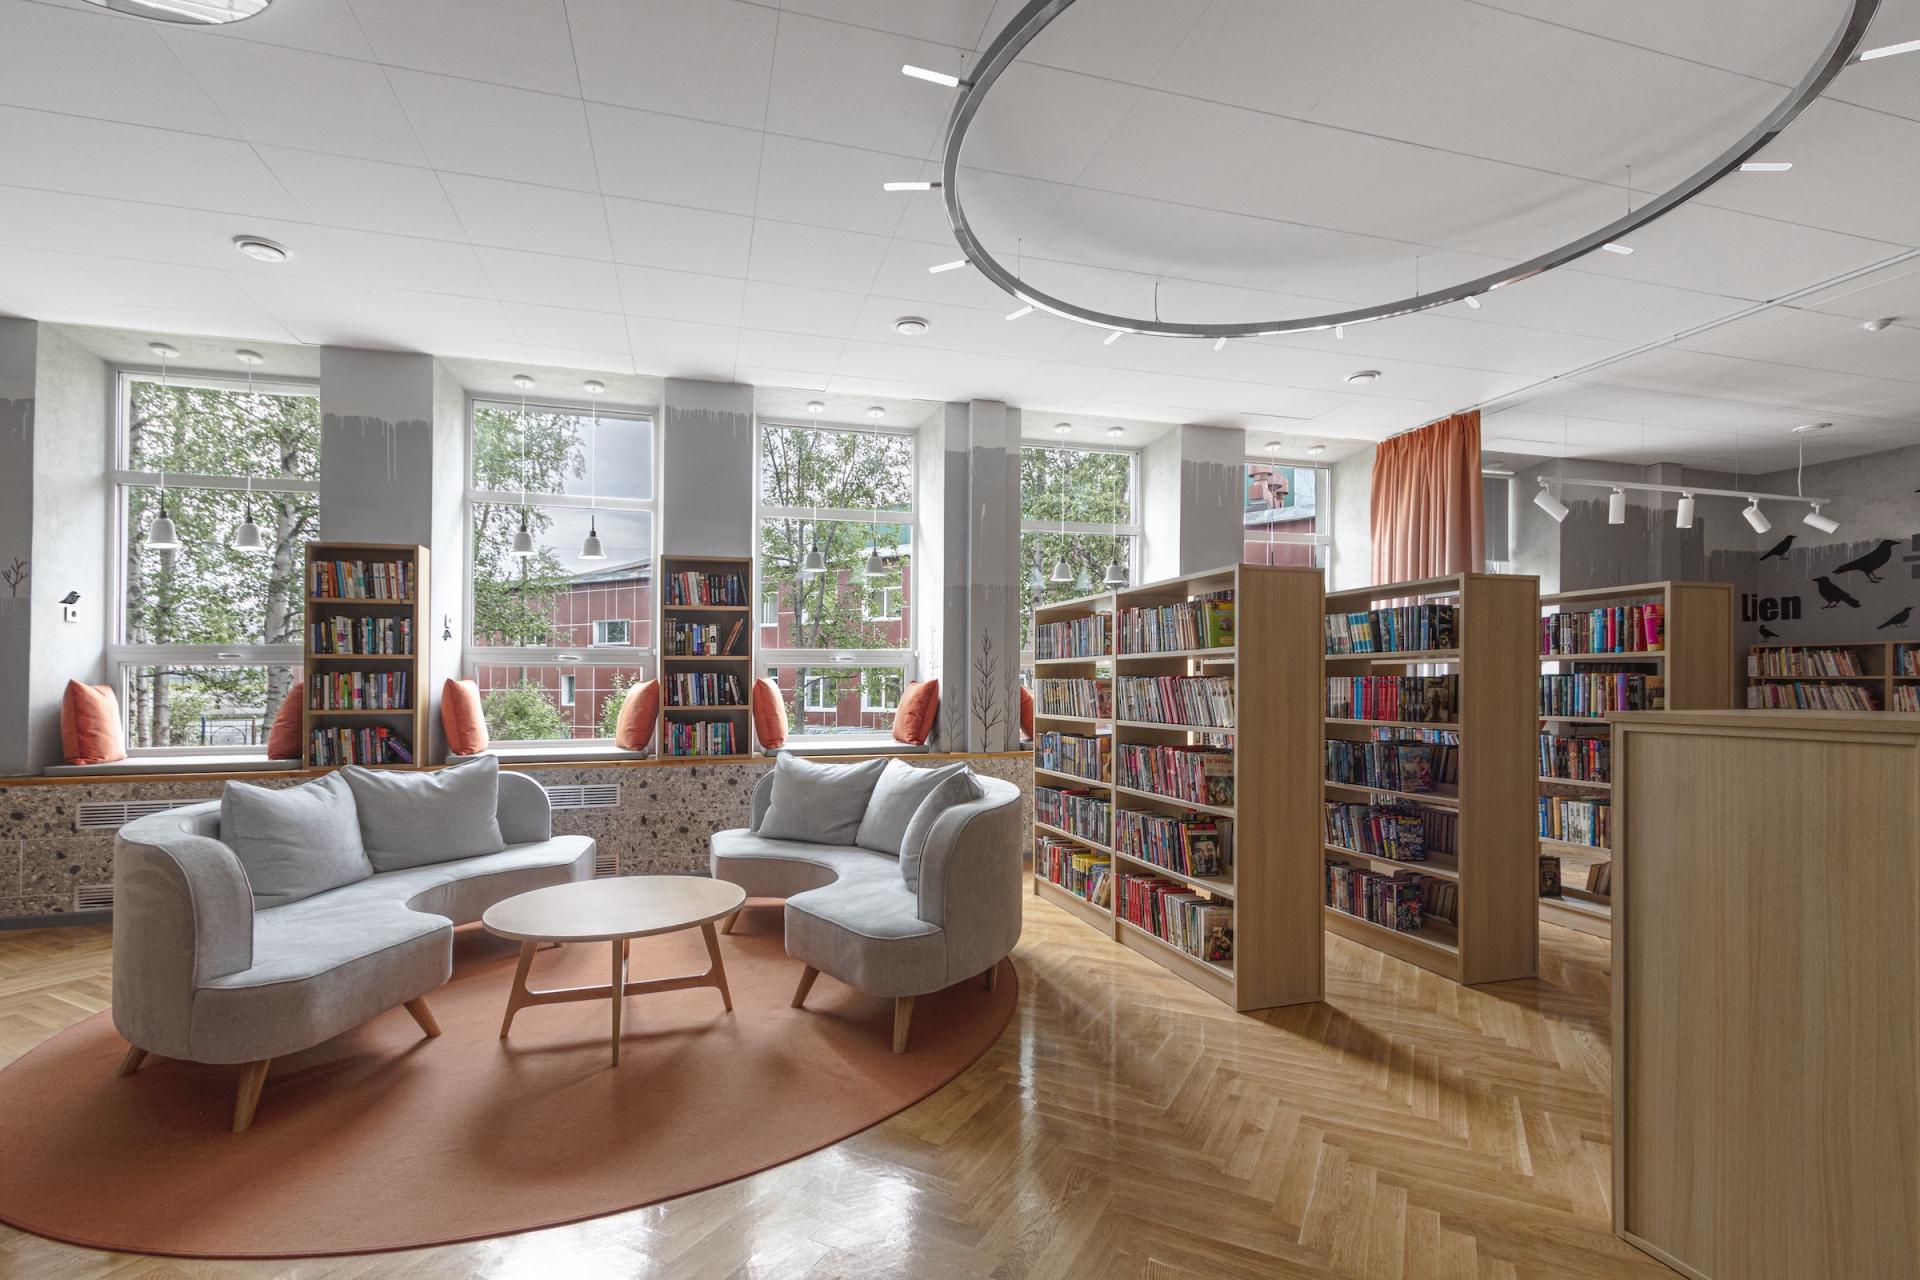 A 10,700 sq. ft. Small Town Library in Russia Gets a Creative Revamp Inspired by Soviet Era Aesthetics